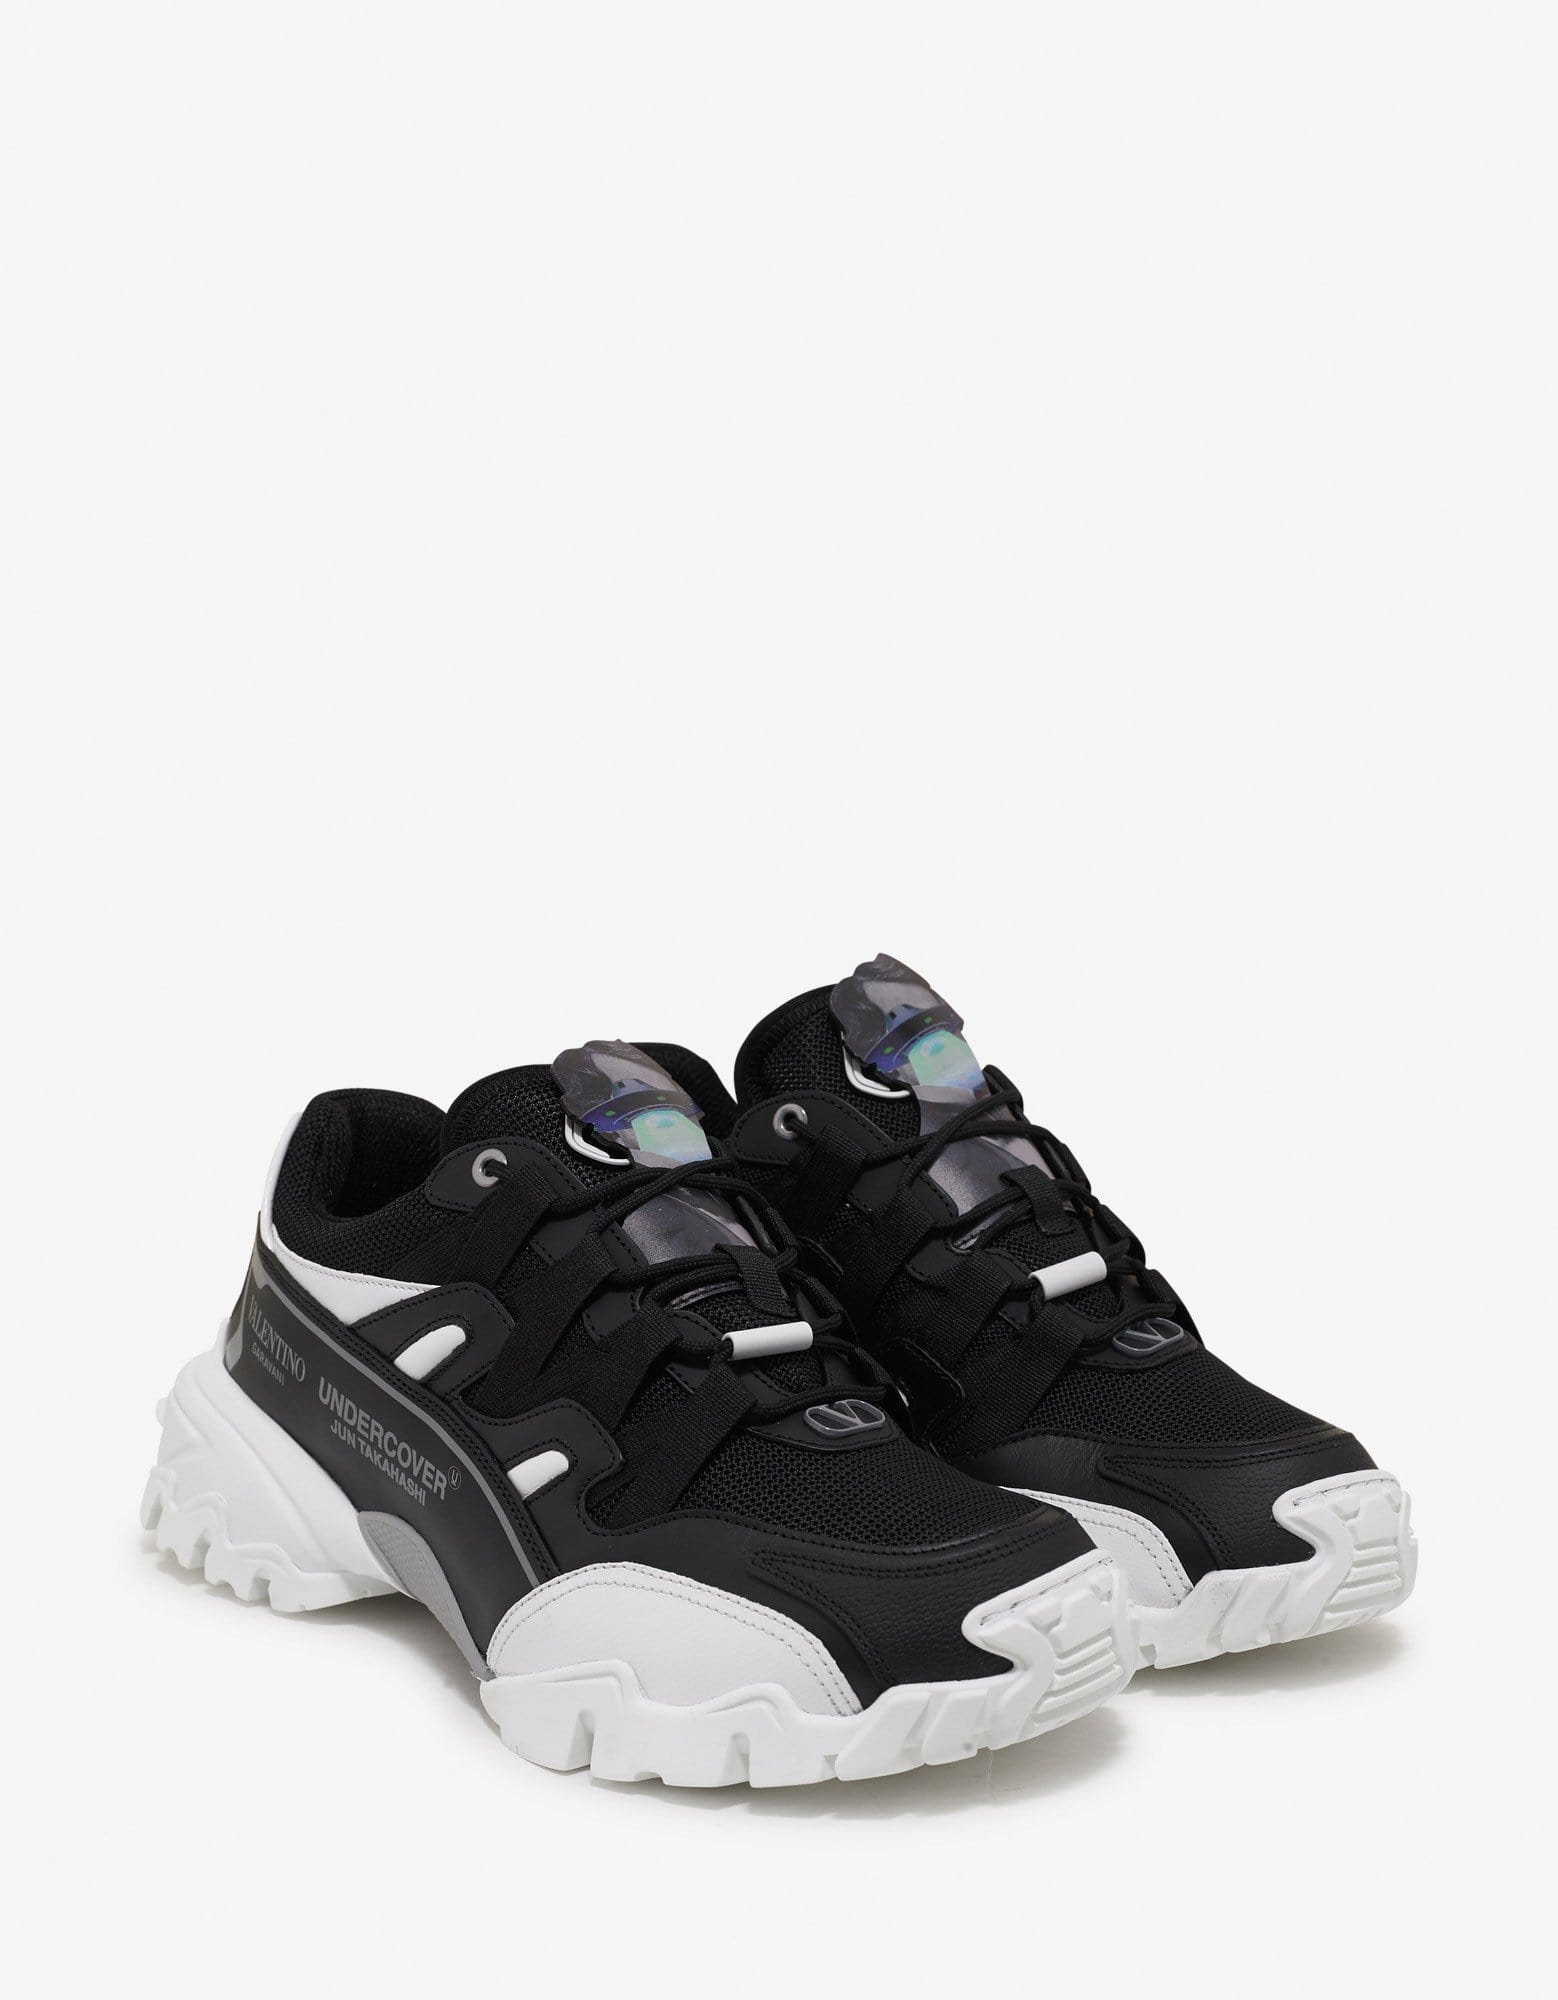 Undercover Black & White Climbers Trainers